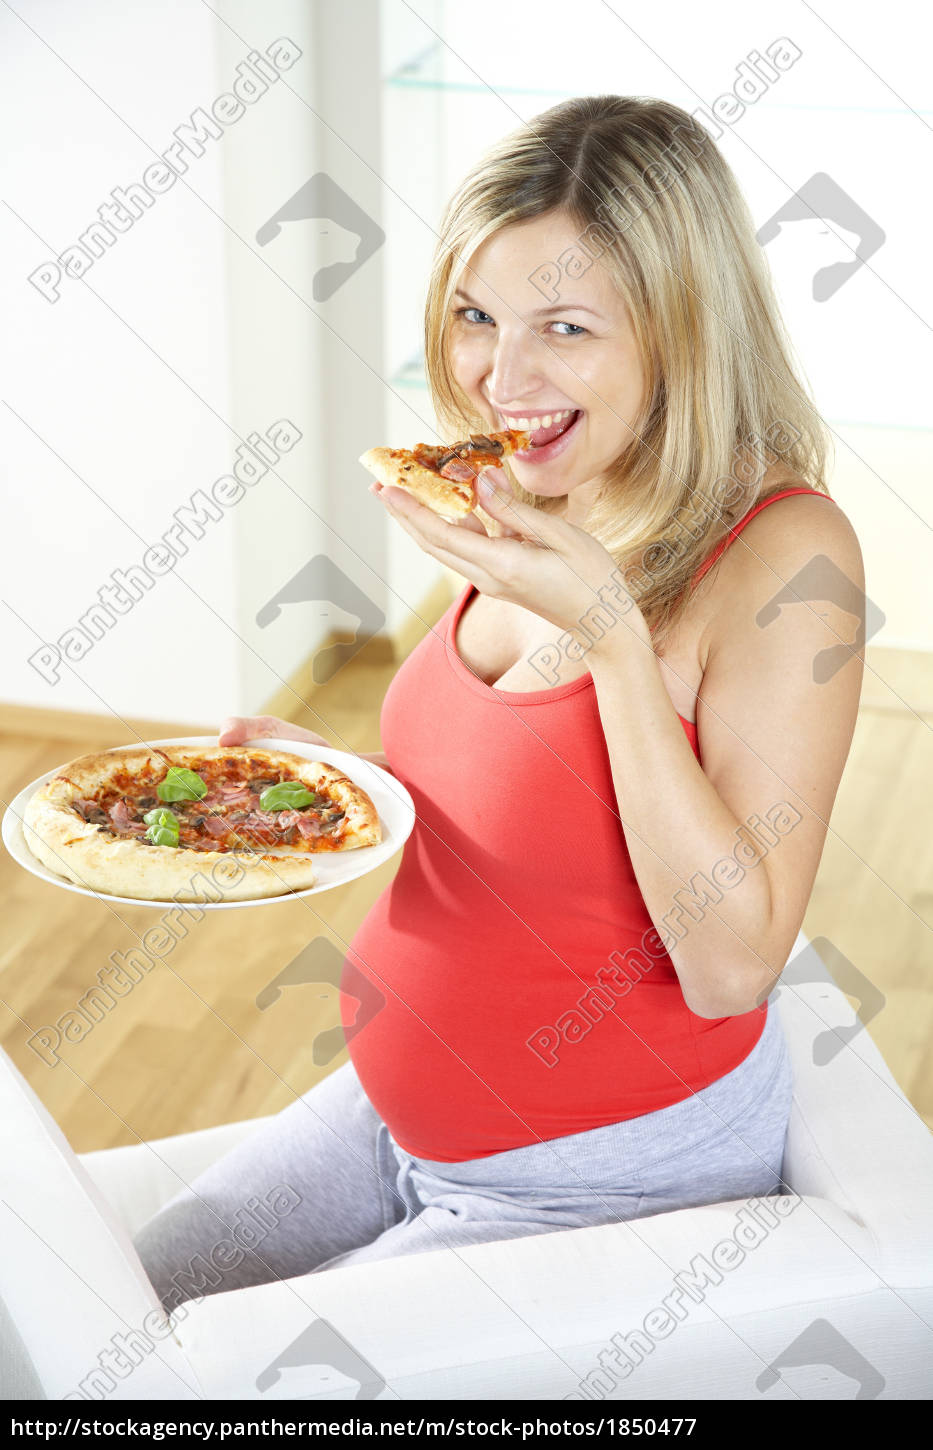 Stock Photo Eating Pizza